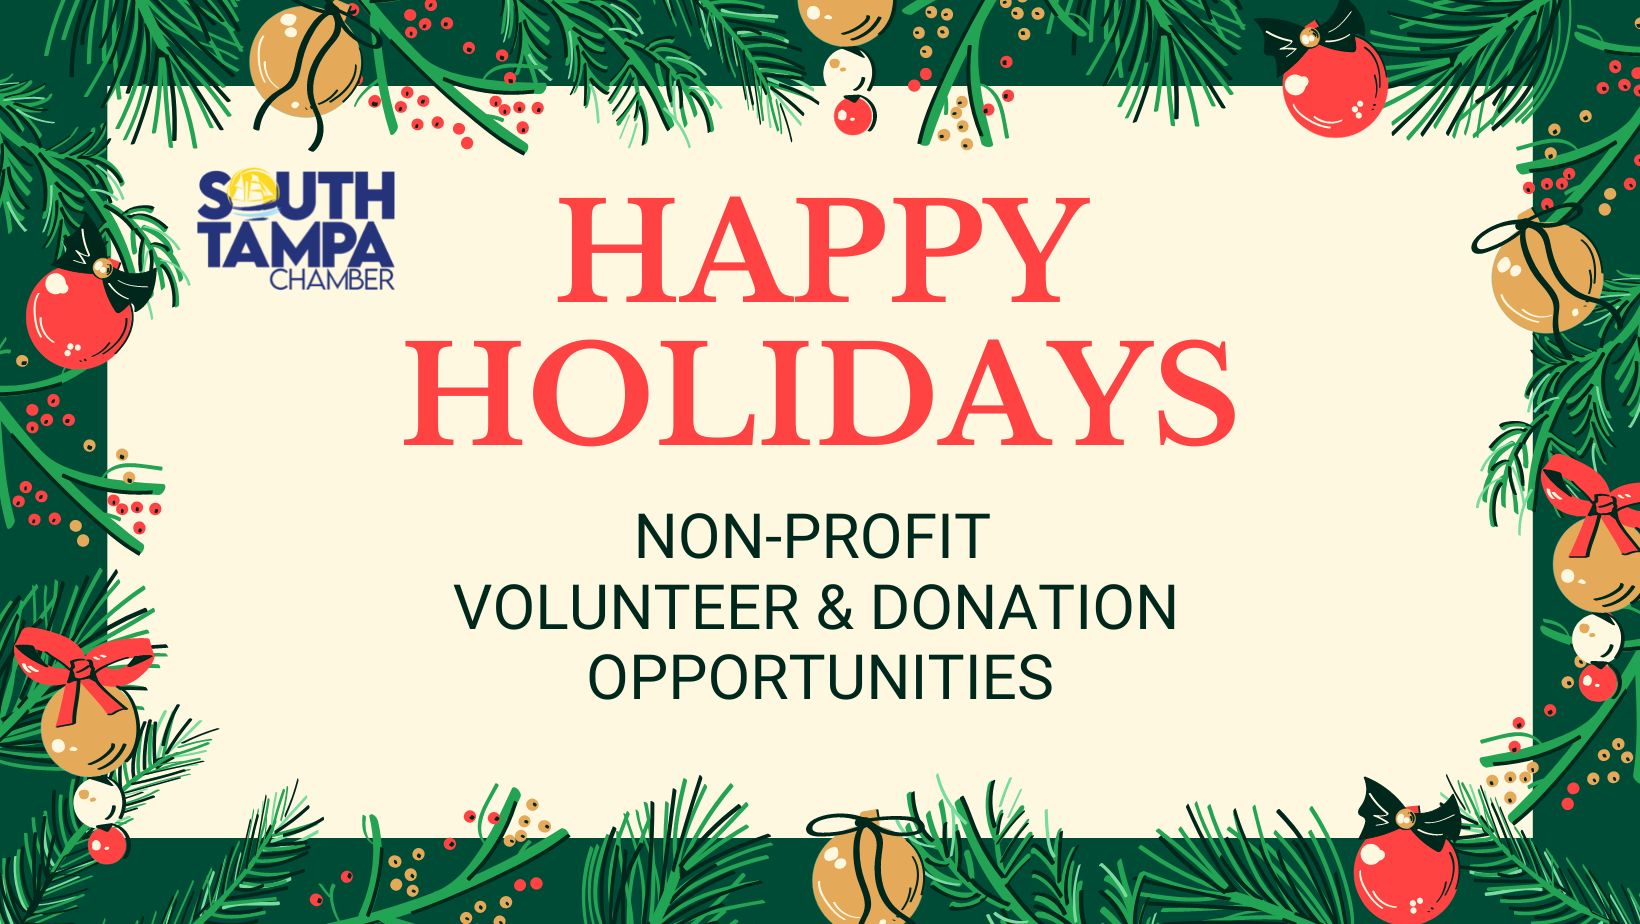 Image for South Tampa Chamber Holiday Non-Profit Donation & Volunteer Opportunities!